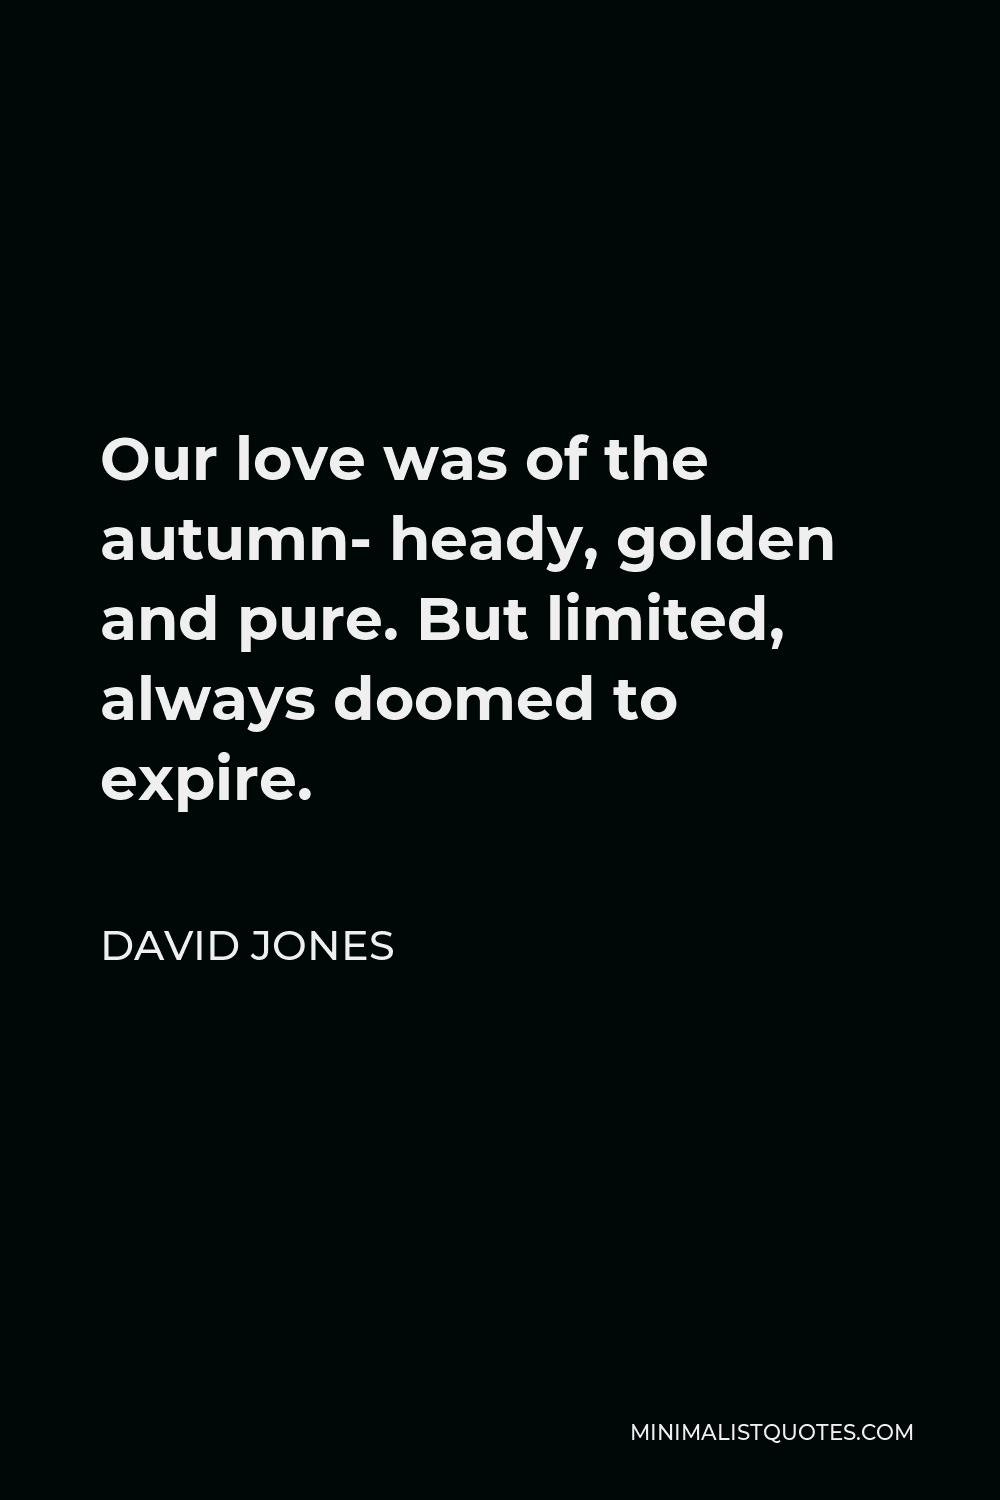 David Jones Quote - Our love was of the autumn- heady, golden and pure. But limited, always doomed to expire.